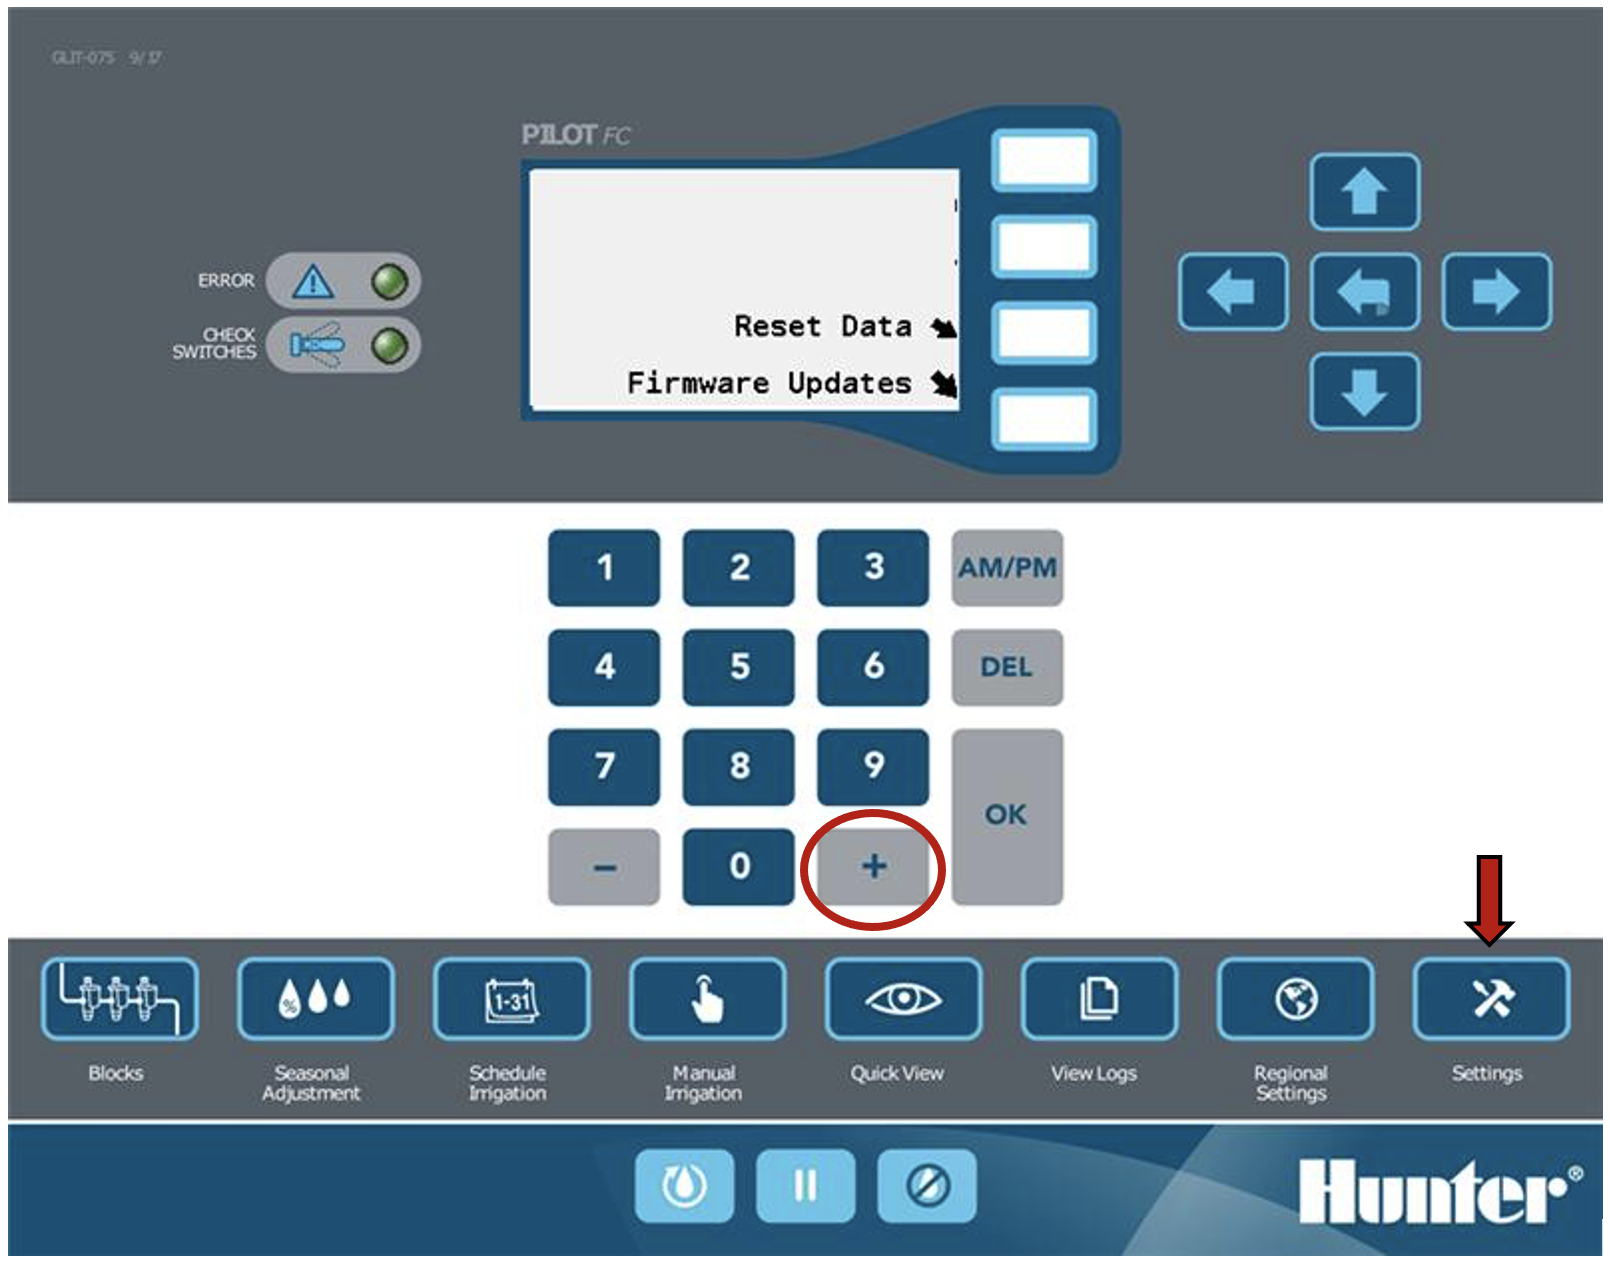 Image of the facepack display showing the plus sign button and the Settings button.